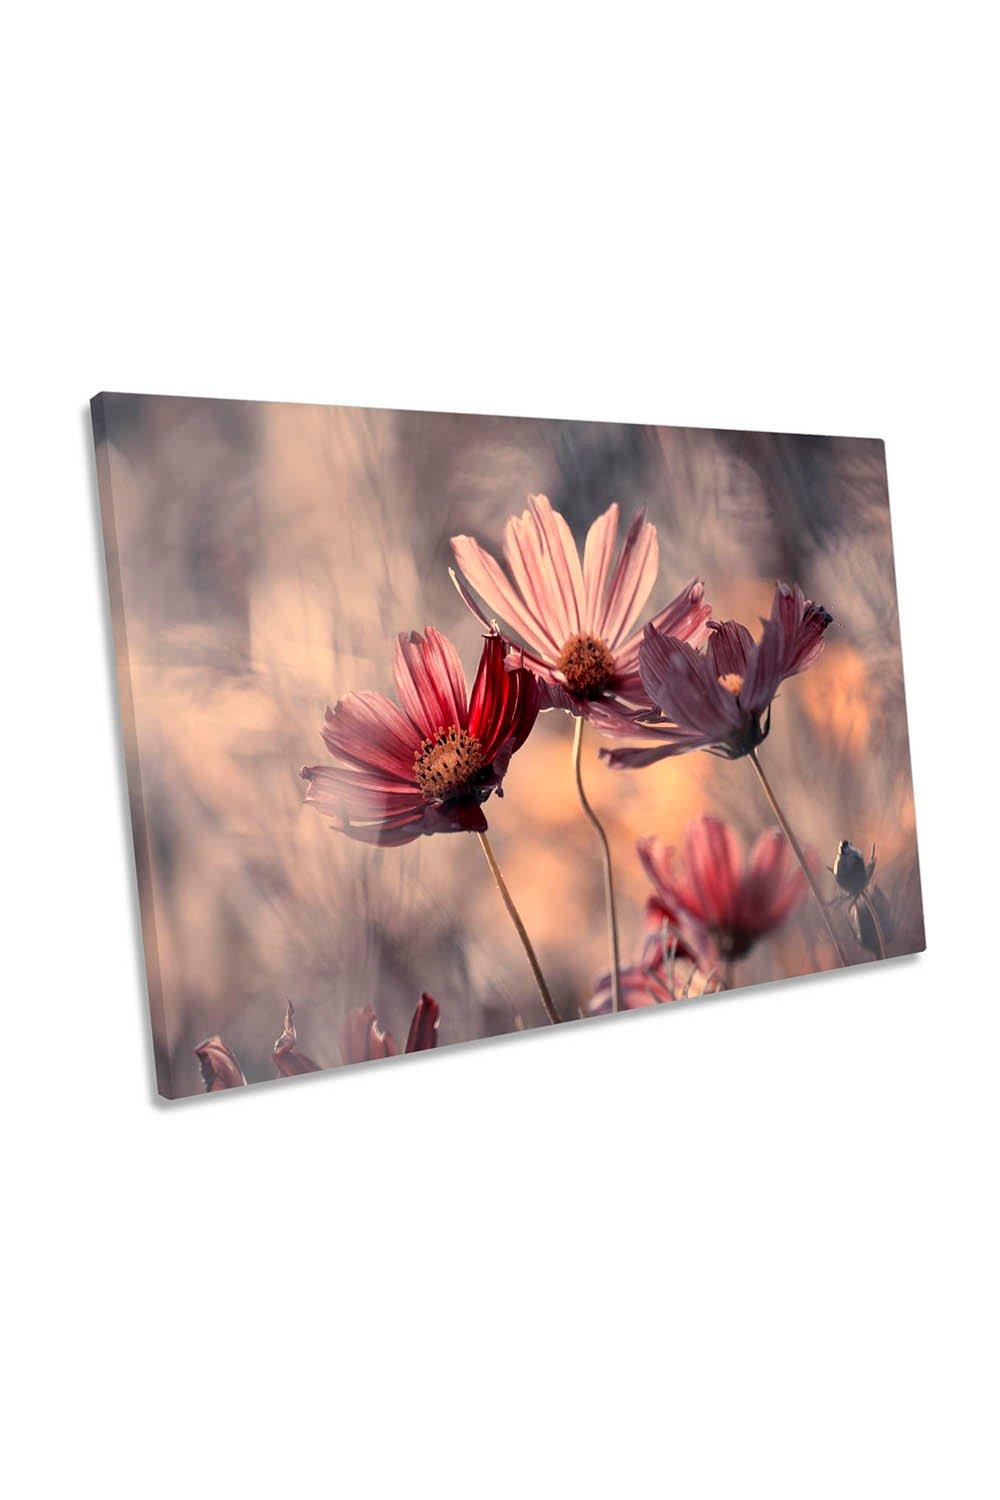 The Three Sisters Flowers Floral Pink Canvas Wall Art Picture Print